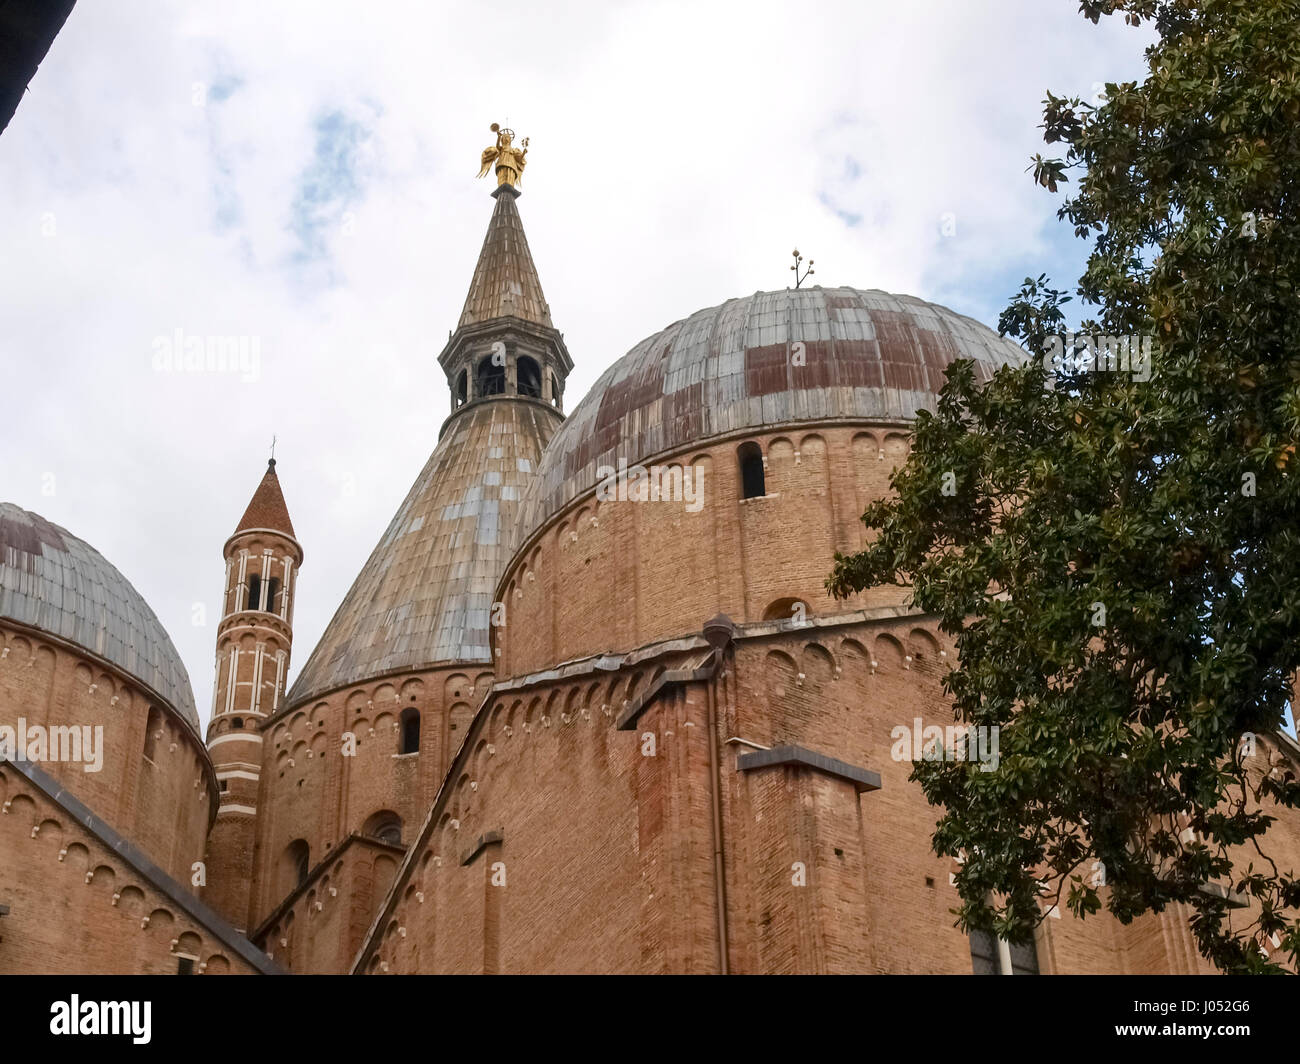 Padova, Italy - May 16, 2016: Basilica of Saint Anthony of Padua view from the cloister of the abbey to the courtyard. The cloister, built in the late Stock Photo